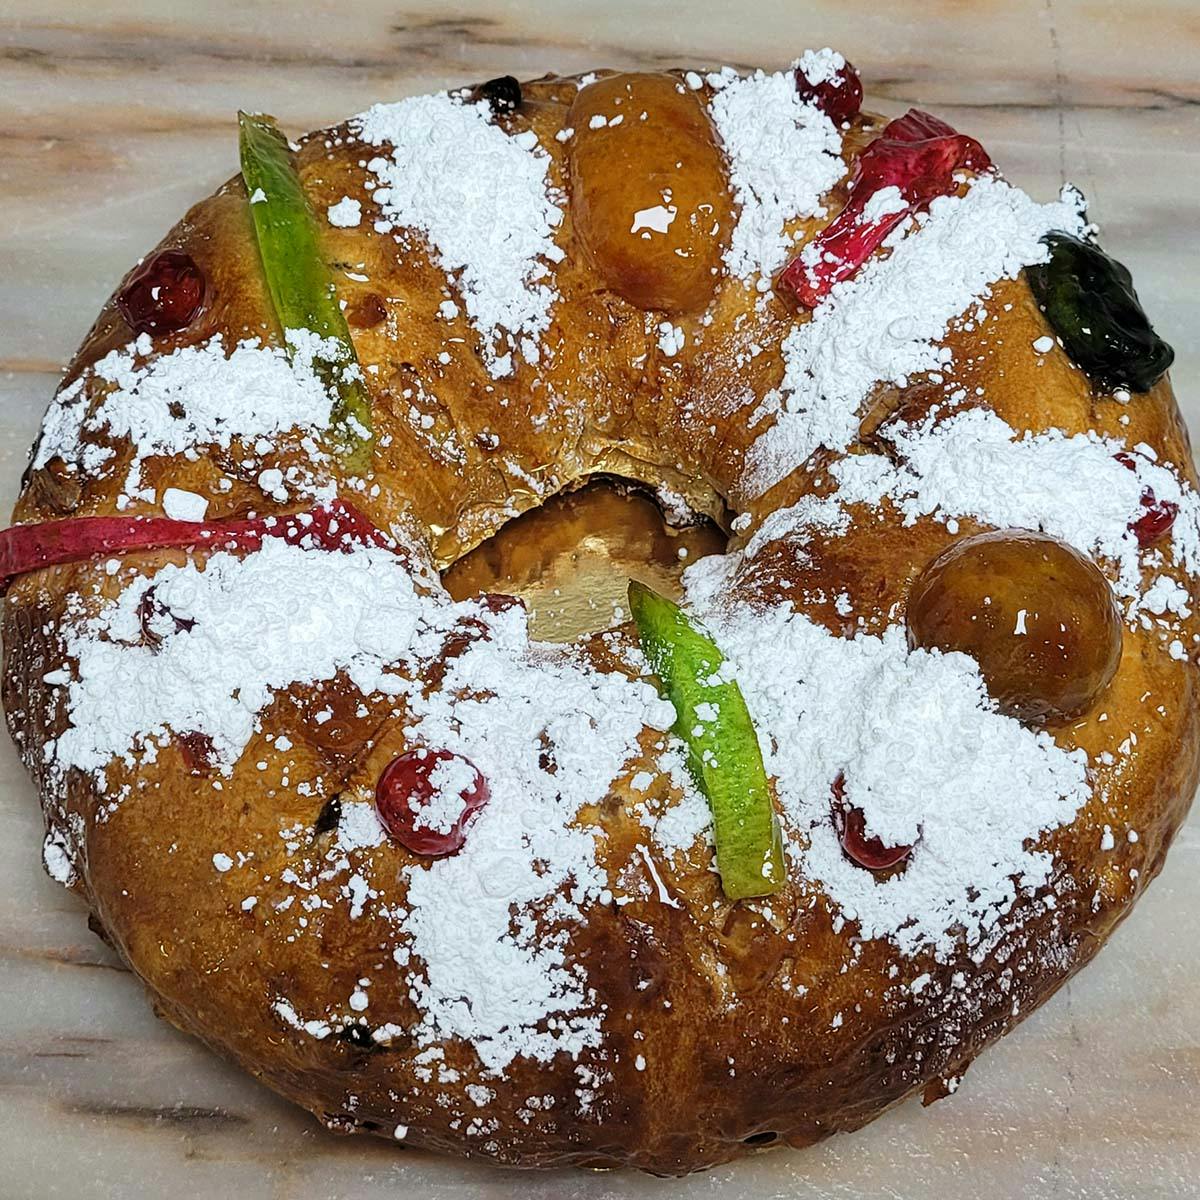 Best Bolo Rei Recipe - How to Make Portuguese Christmas King's Cake